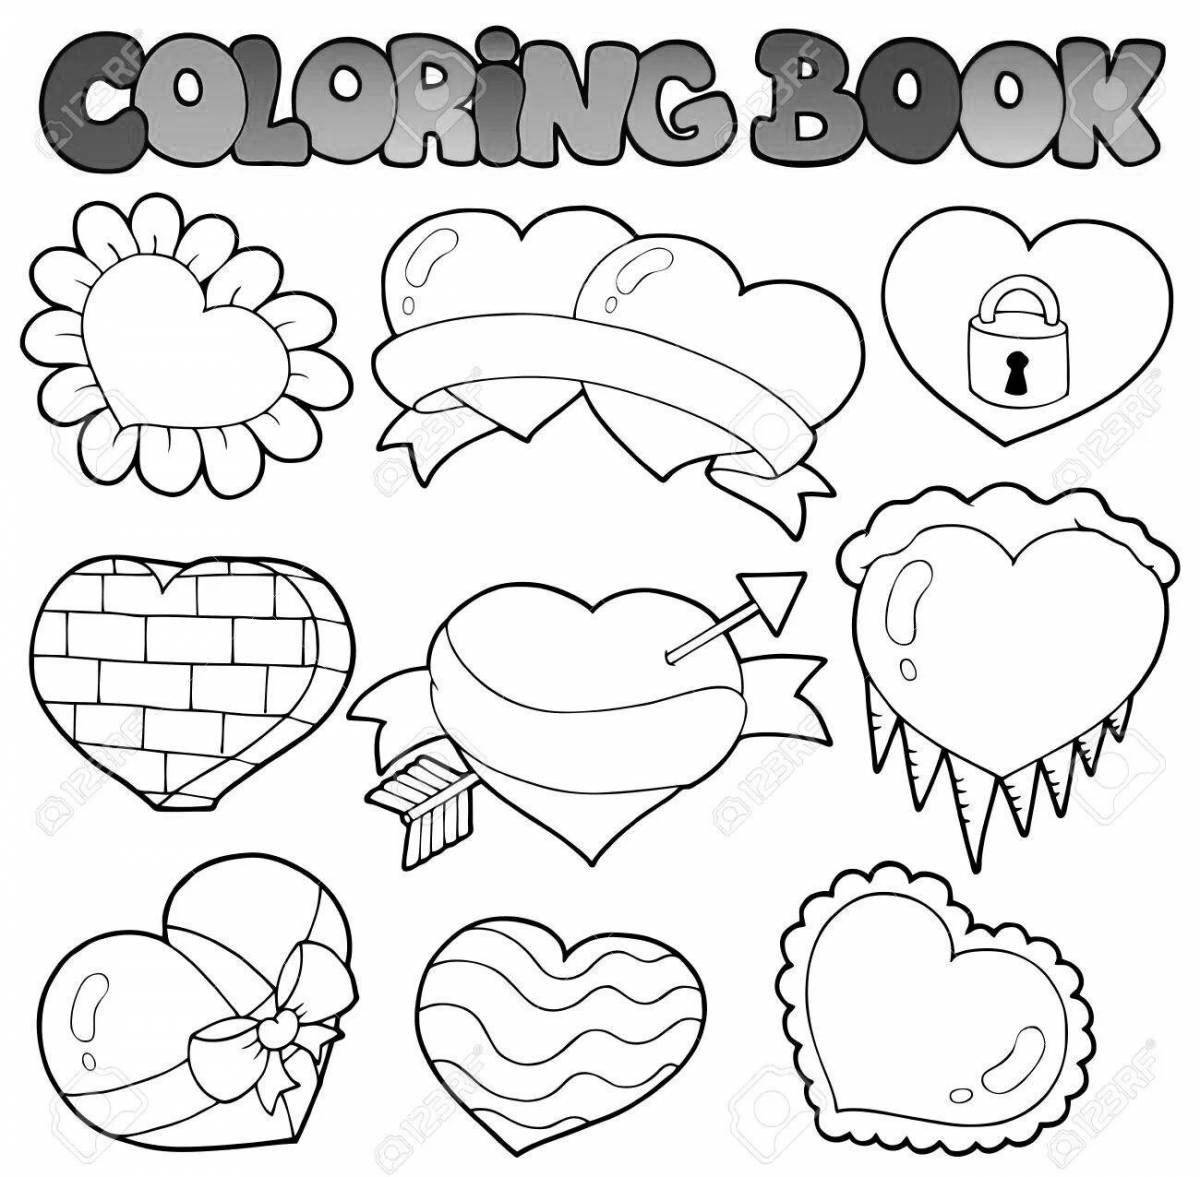 Coloring lot of bright hearts